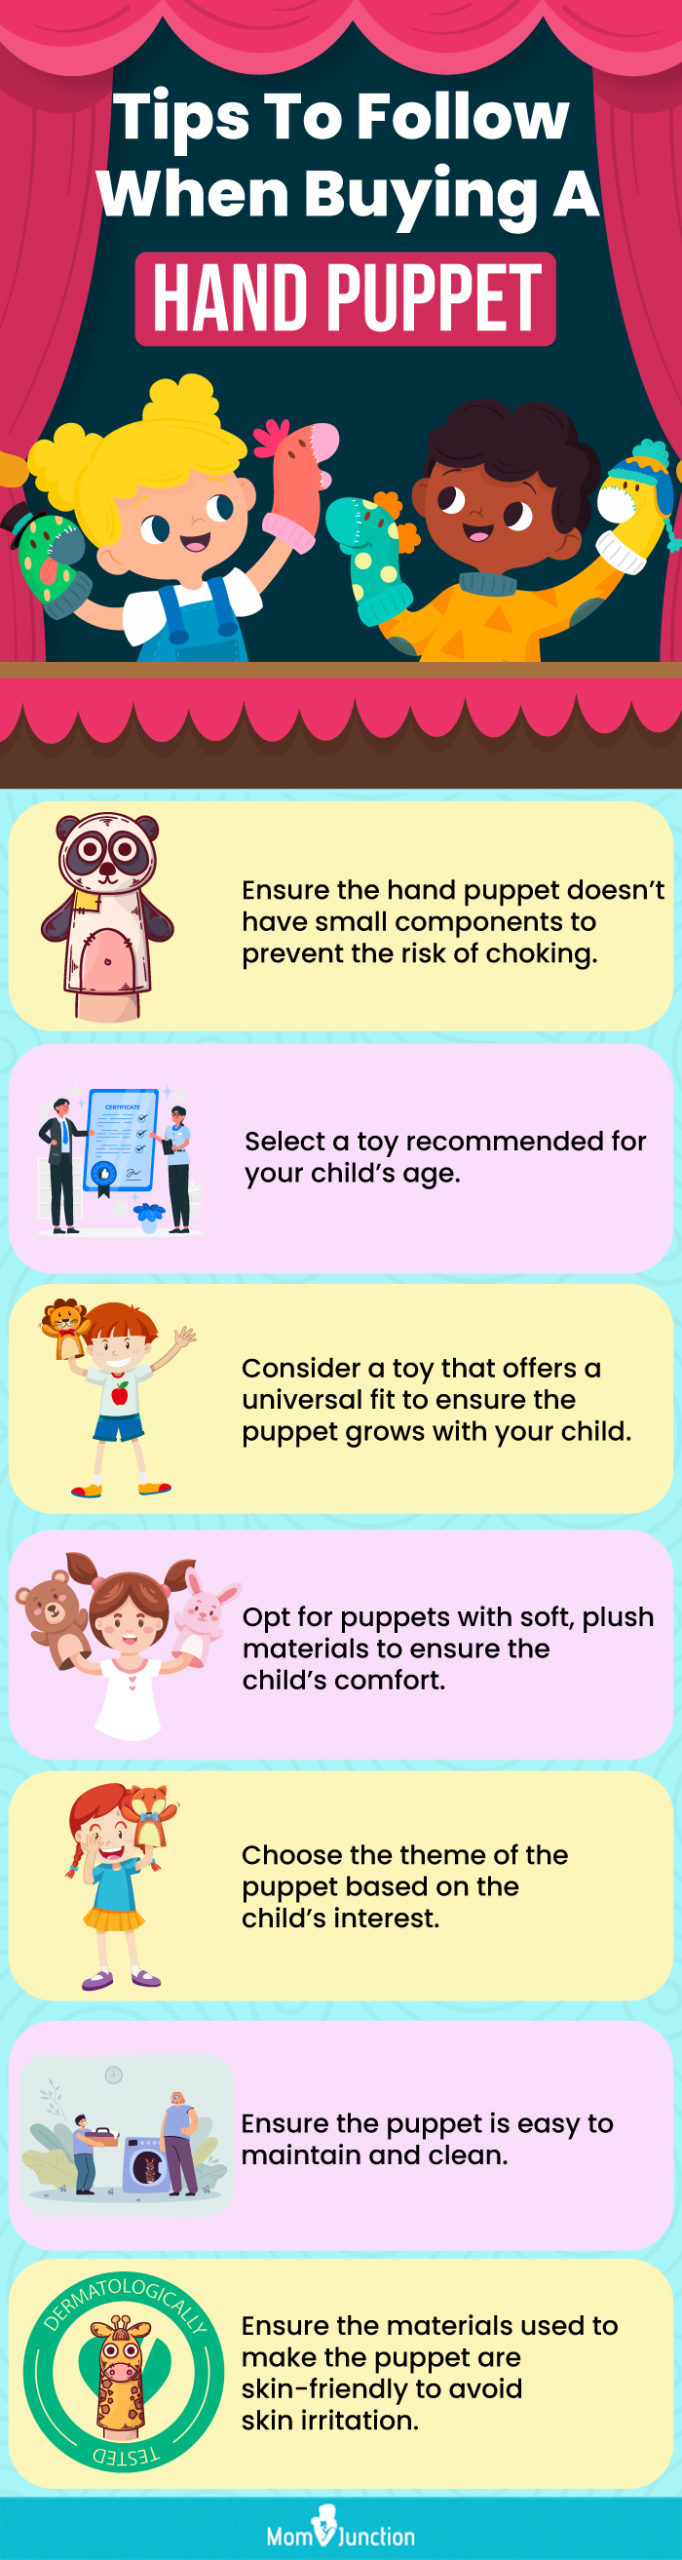 Tips To Follow When Buying A Hand Puppet (infographic)